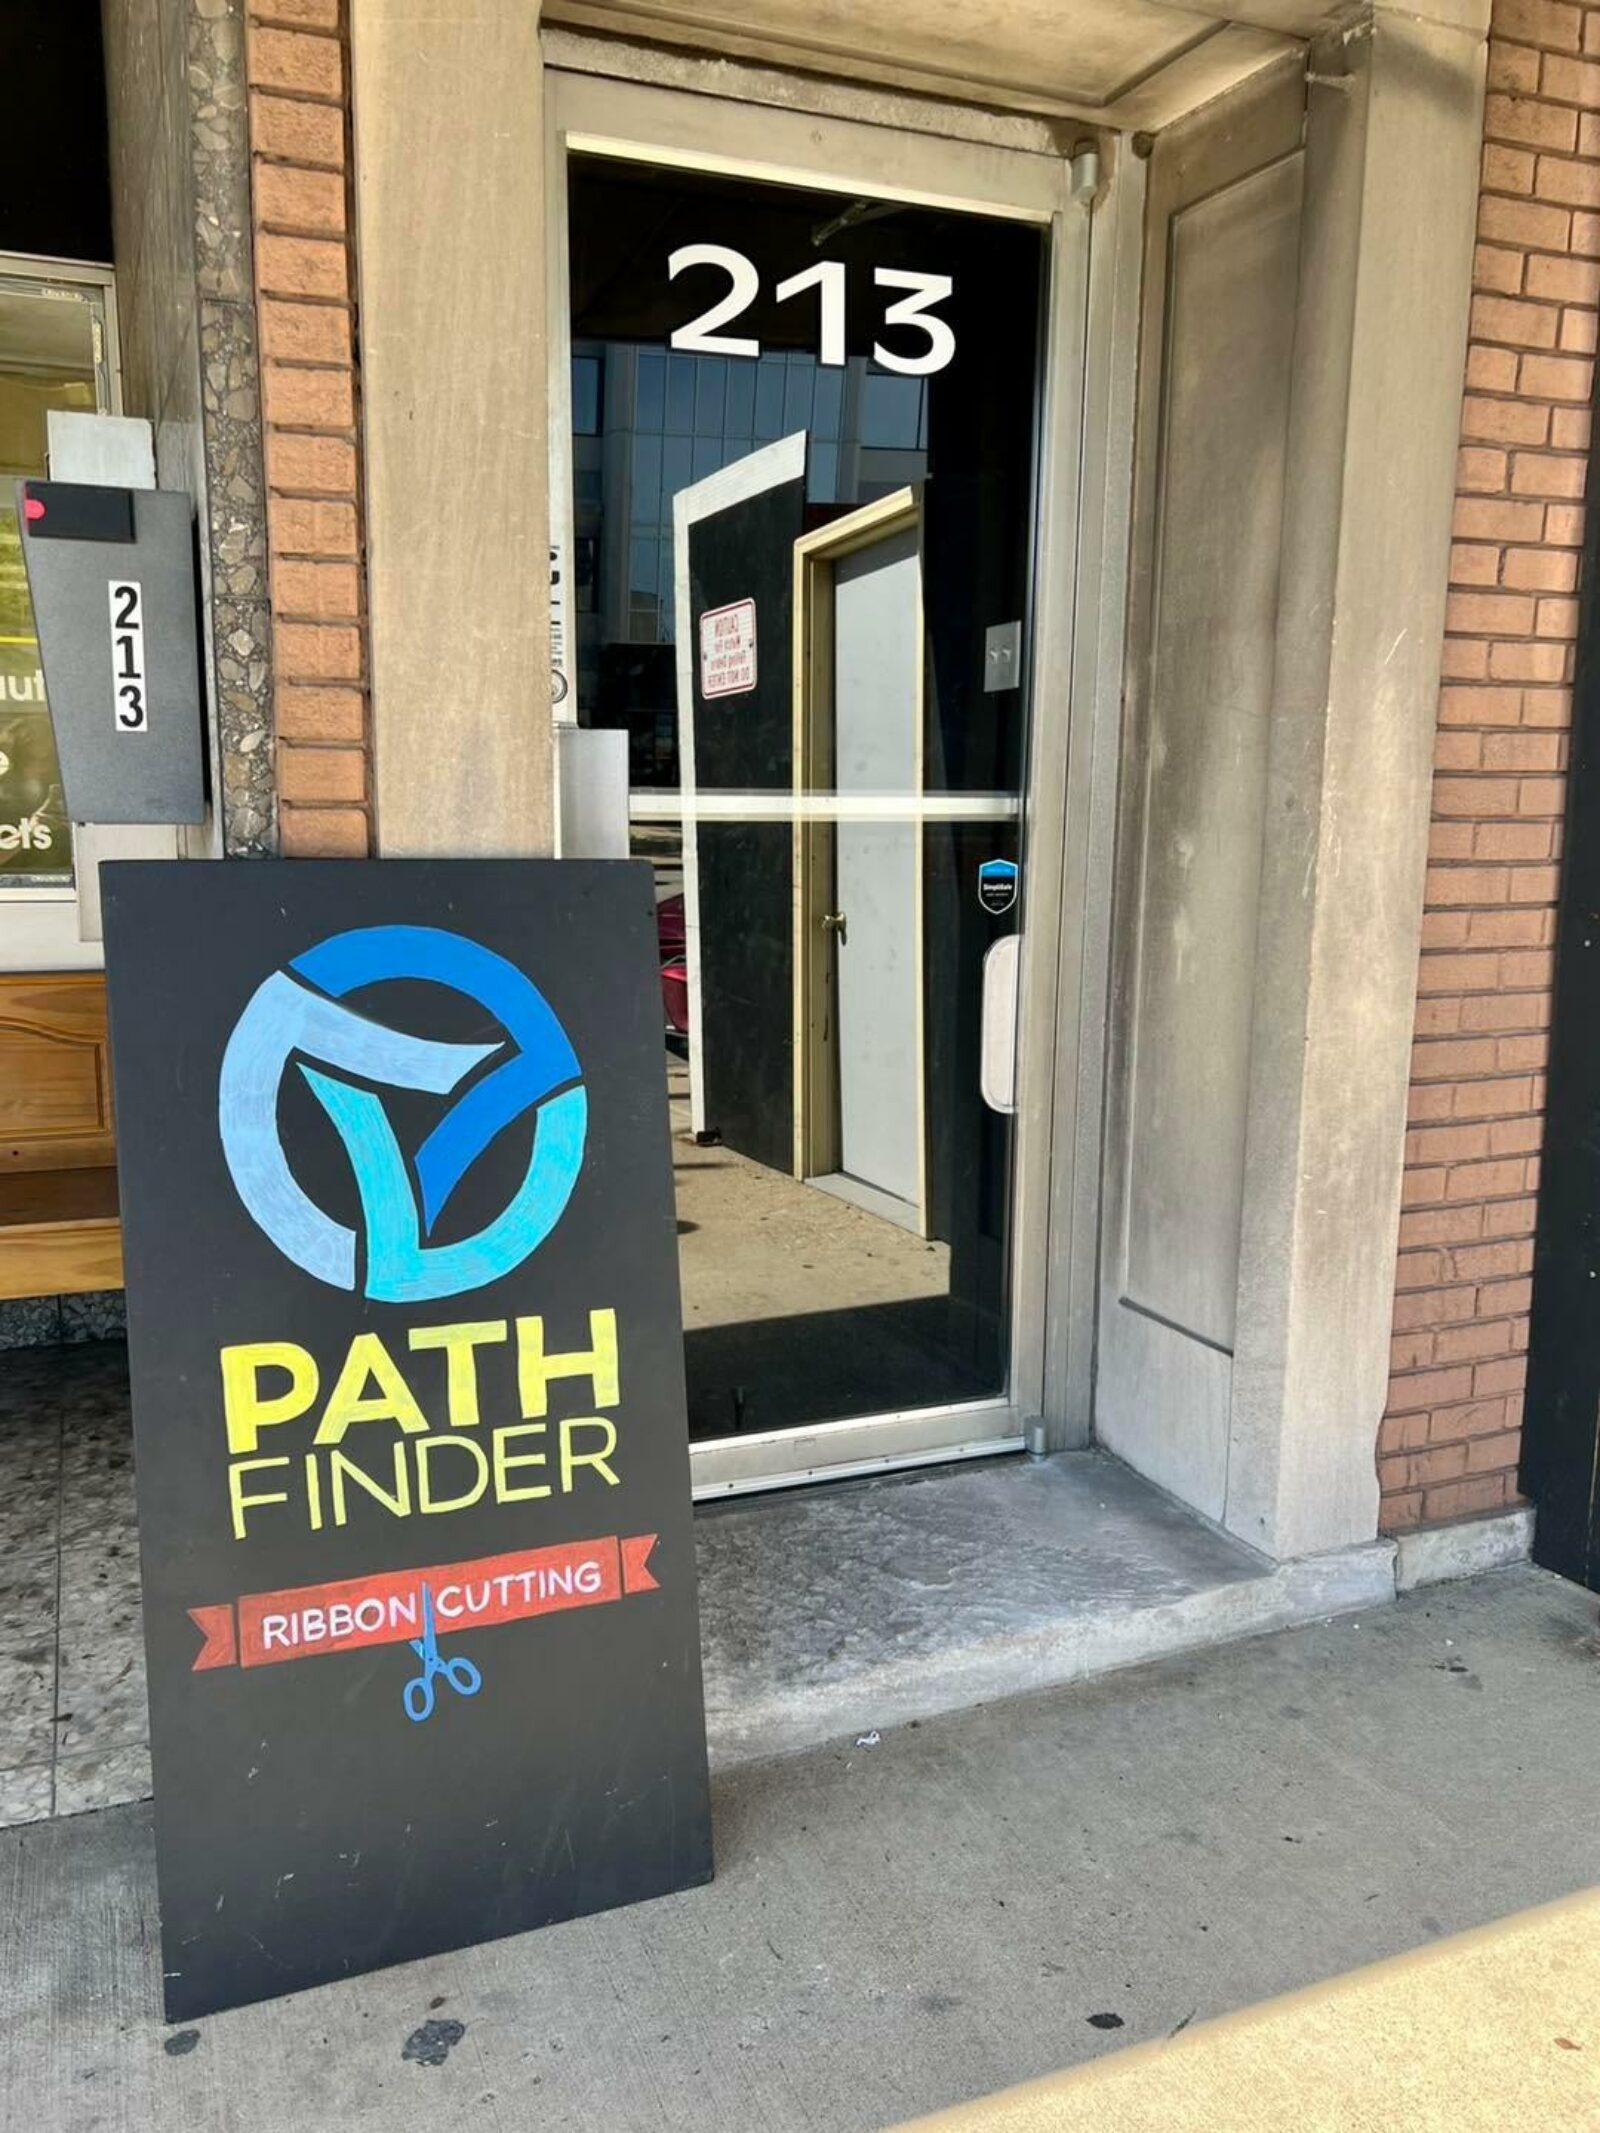 The One Where Pathfinder Opens Their Office